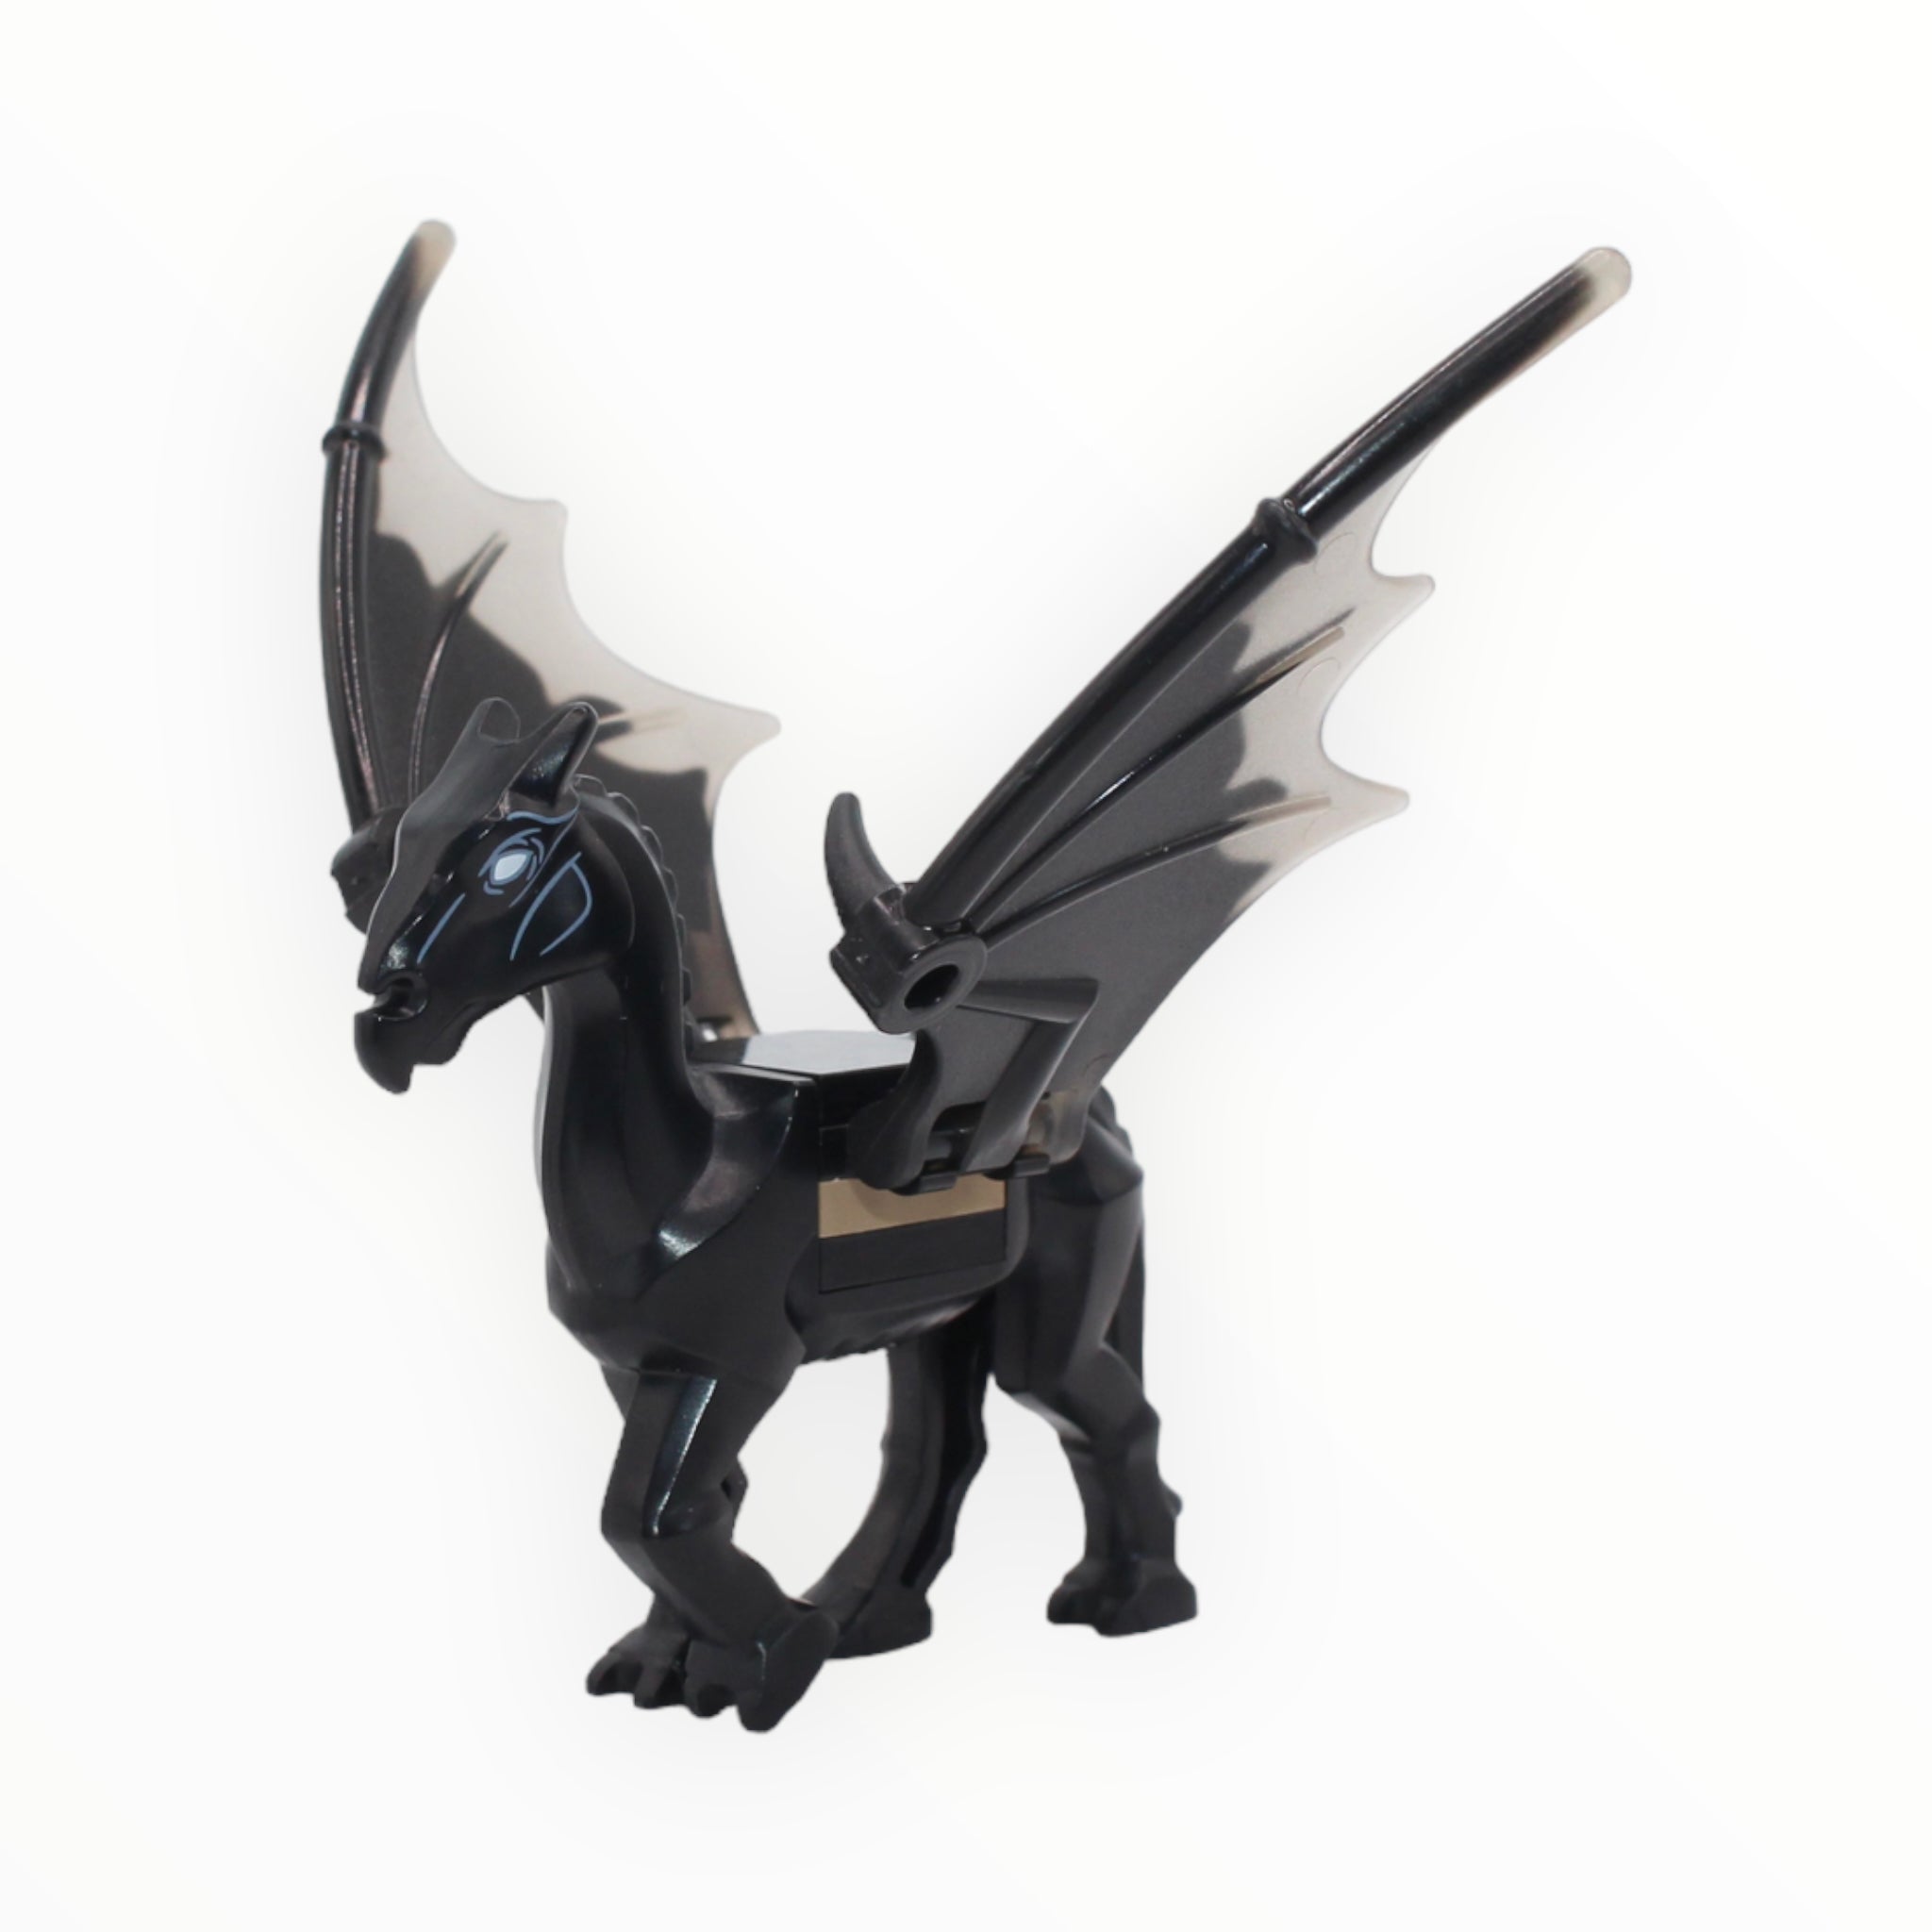 Thestral (trans-brown wing trailing, 2018)